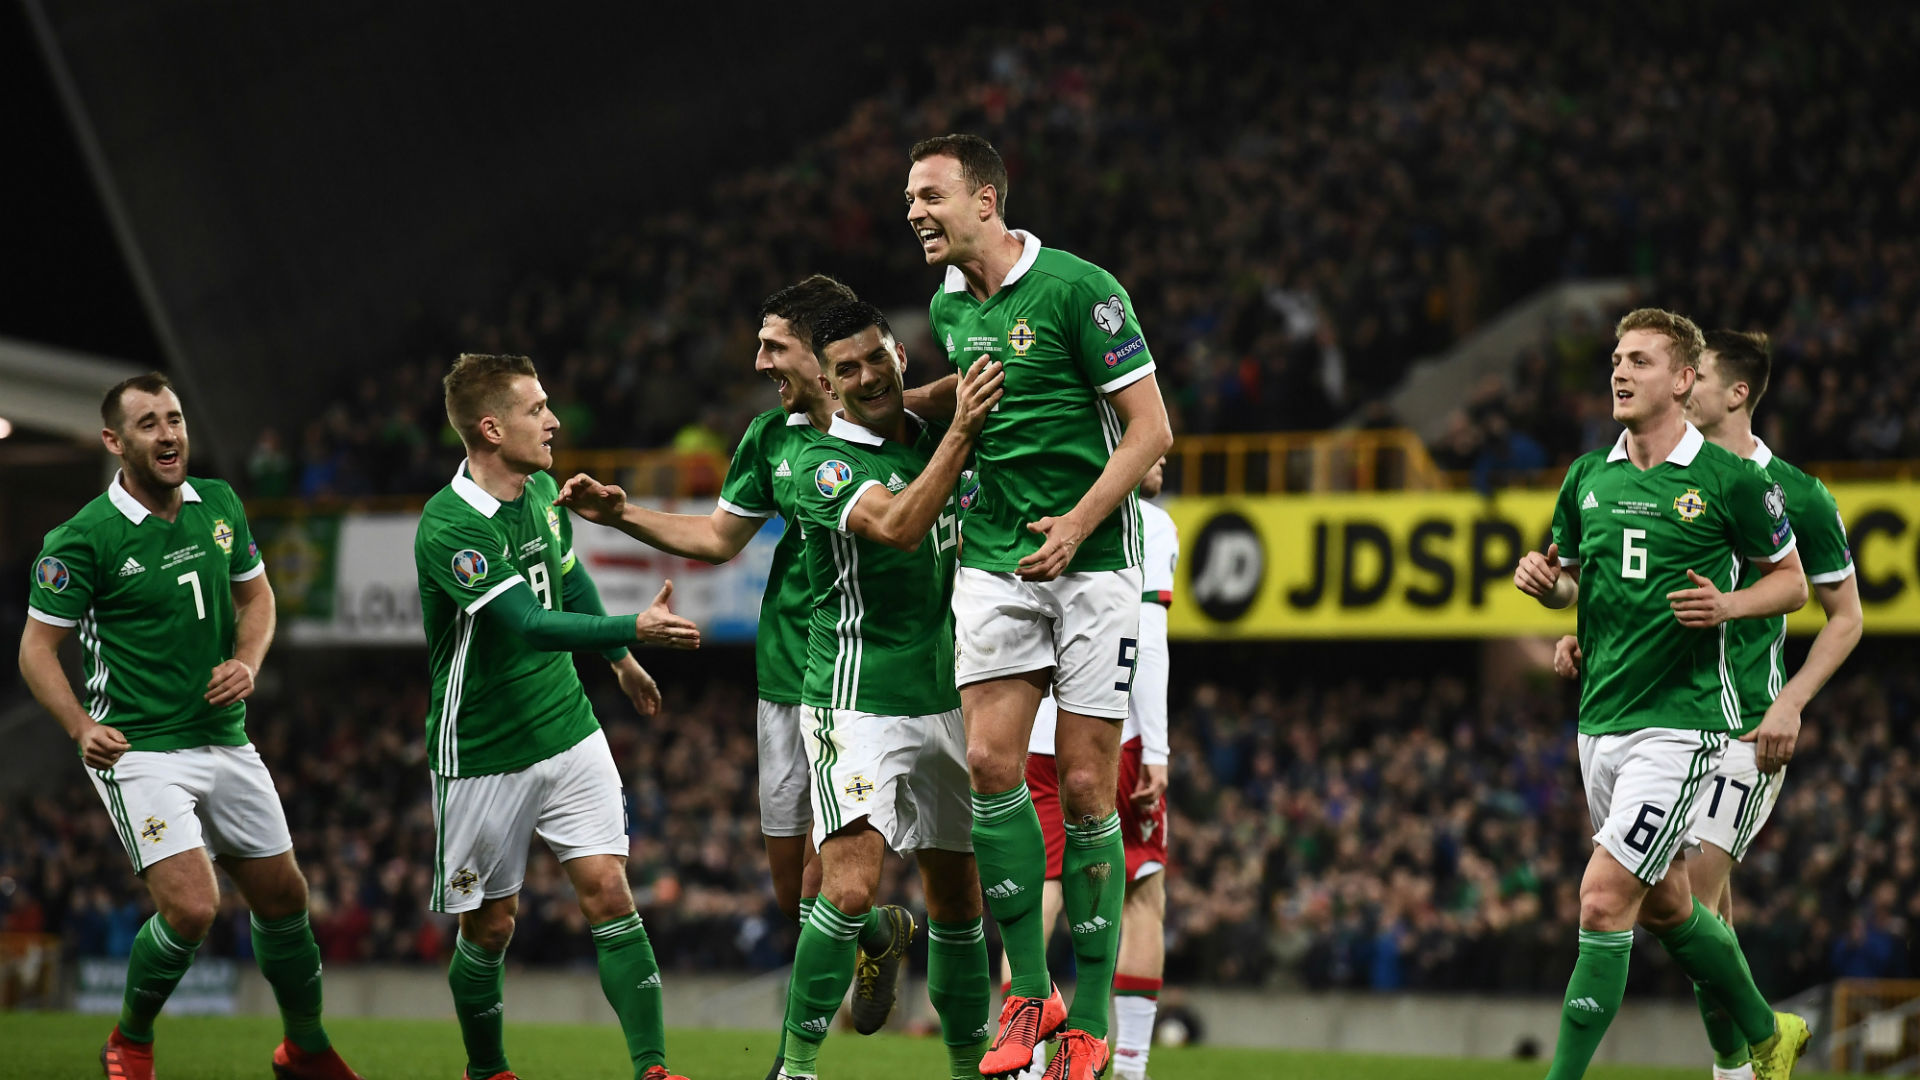 Northern Ireland goes top of Group C